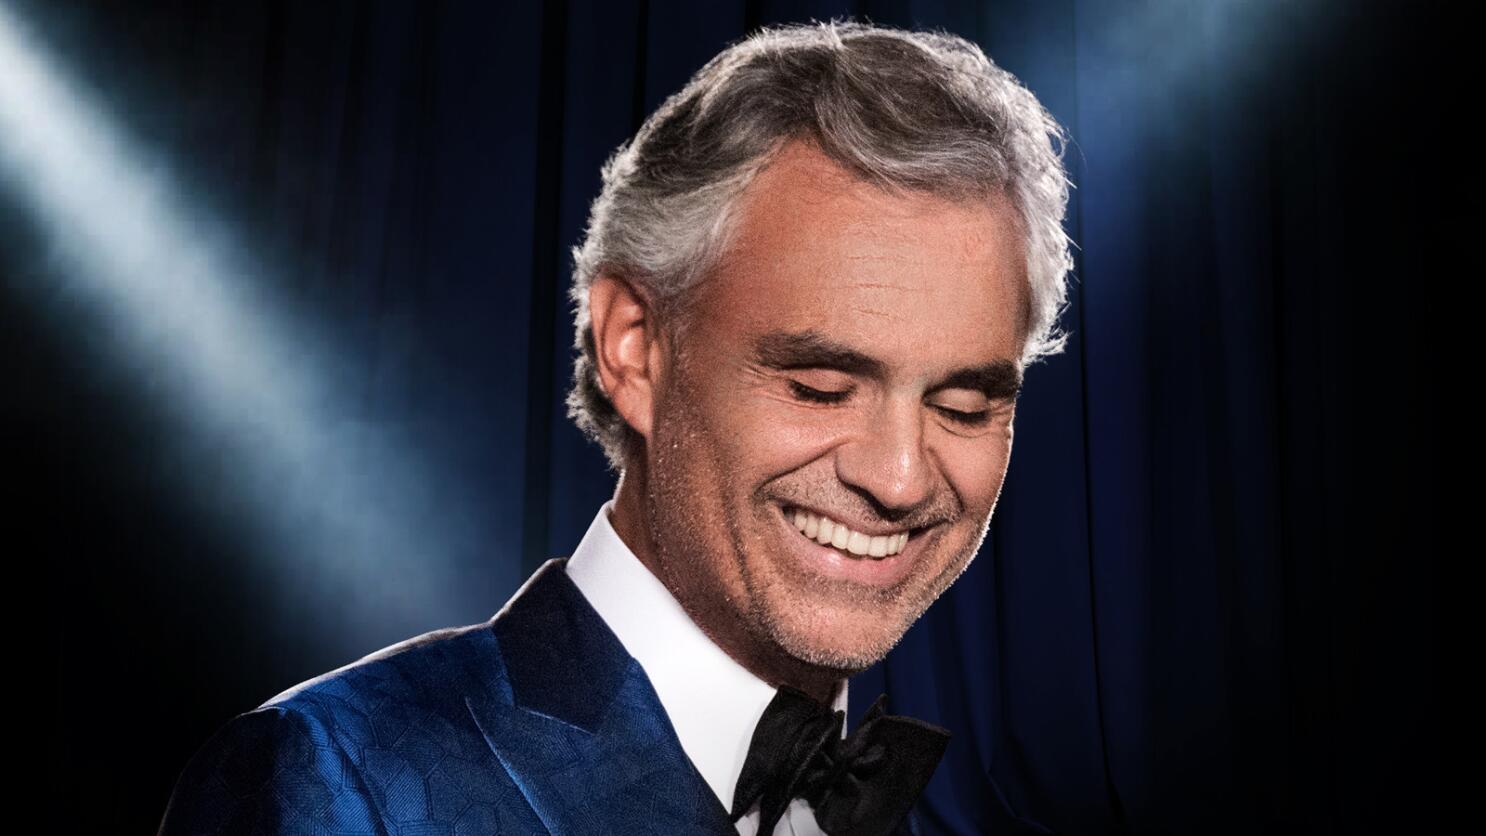 Andrea Bocelli - If Only 